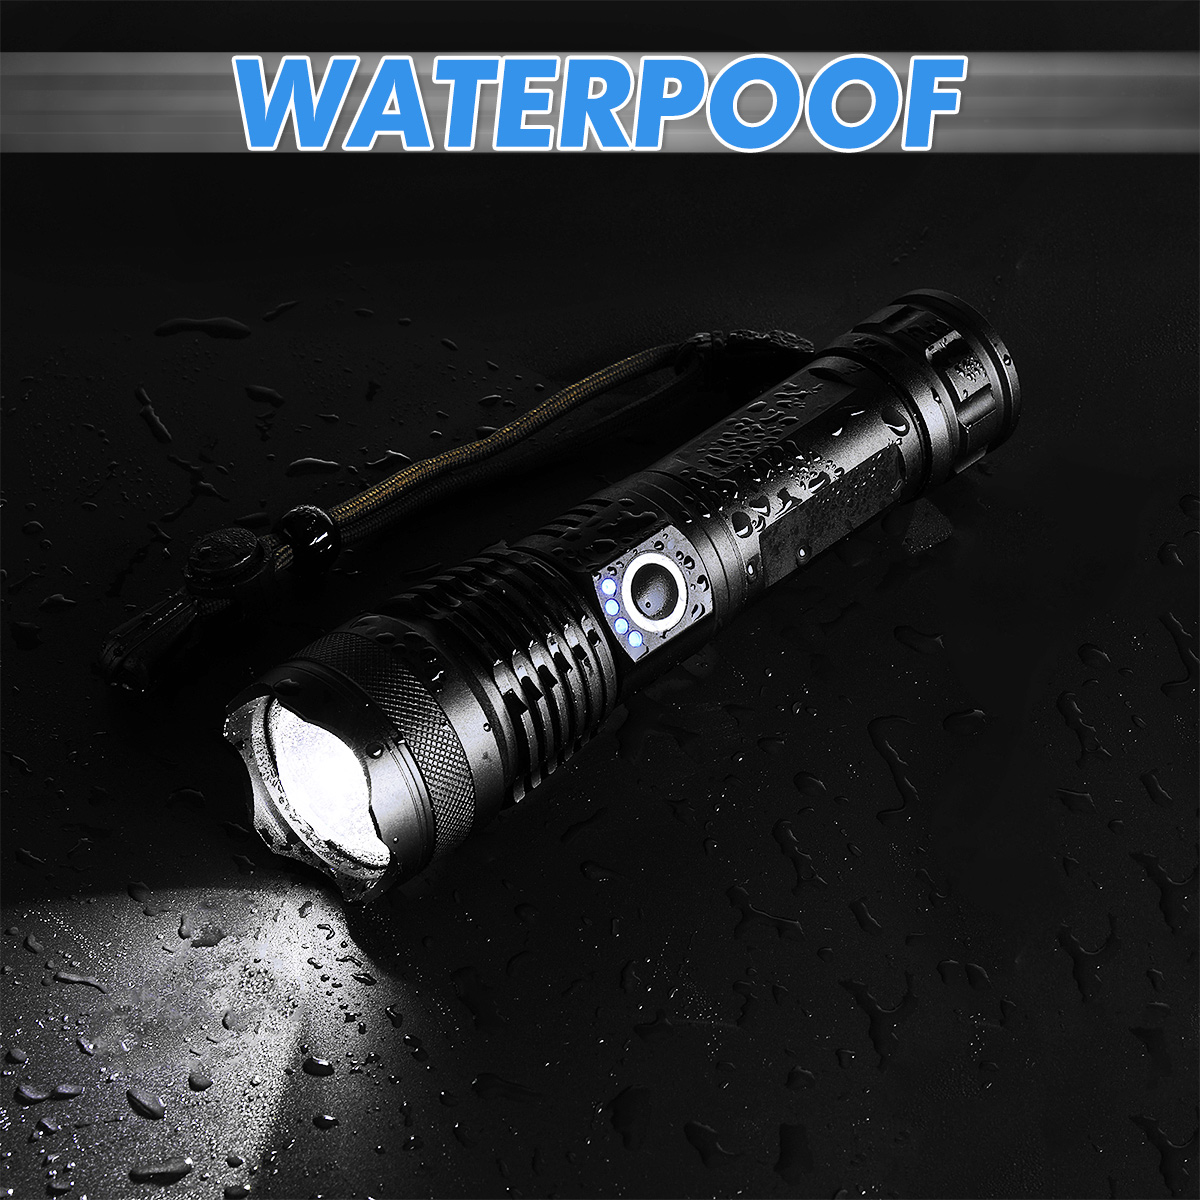 LIUMY-P50-LED-Zoomable-Flashlight-Set-with-26650-Battery-USB-Cable-Power-Display-USB-Rechargeable-LE-1819595-6